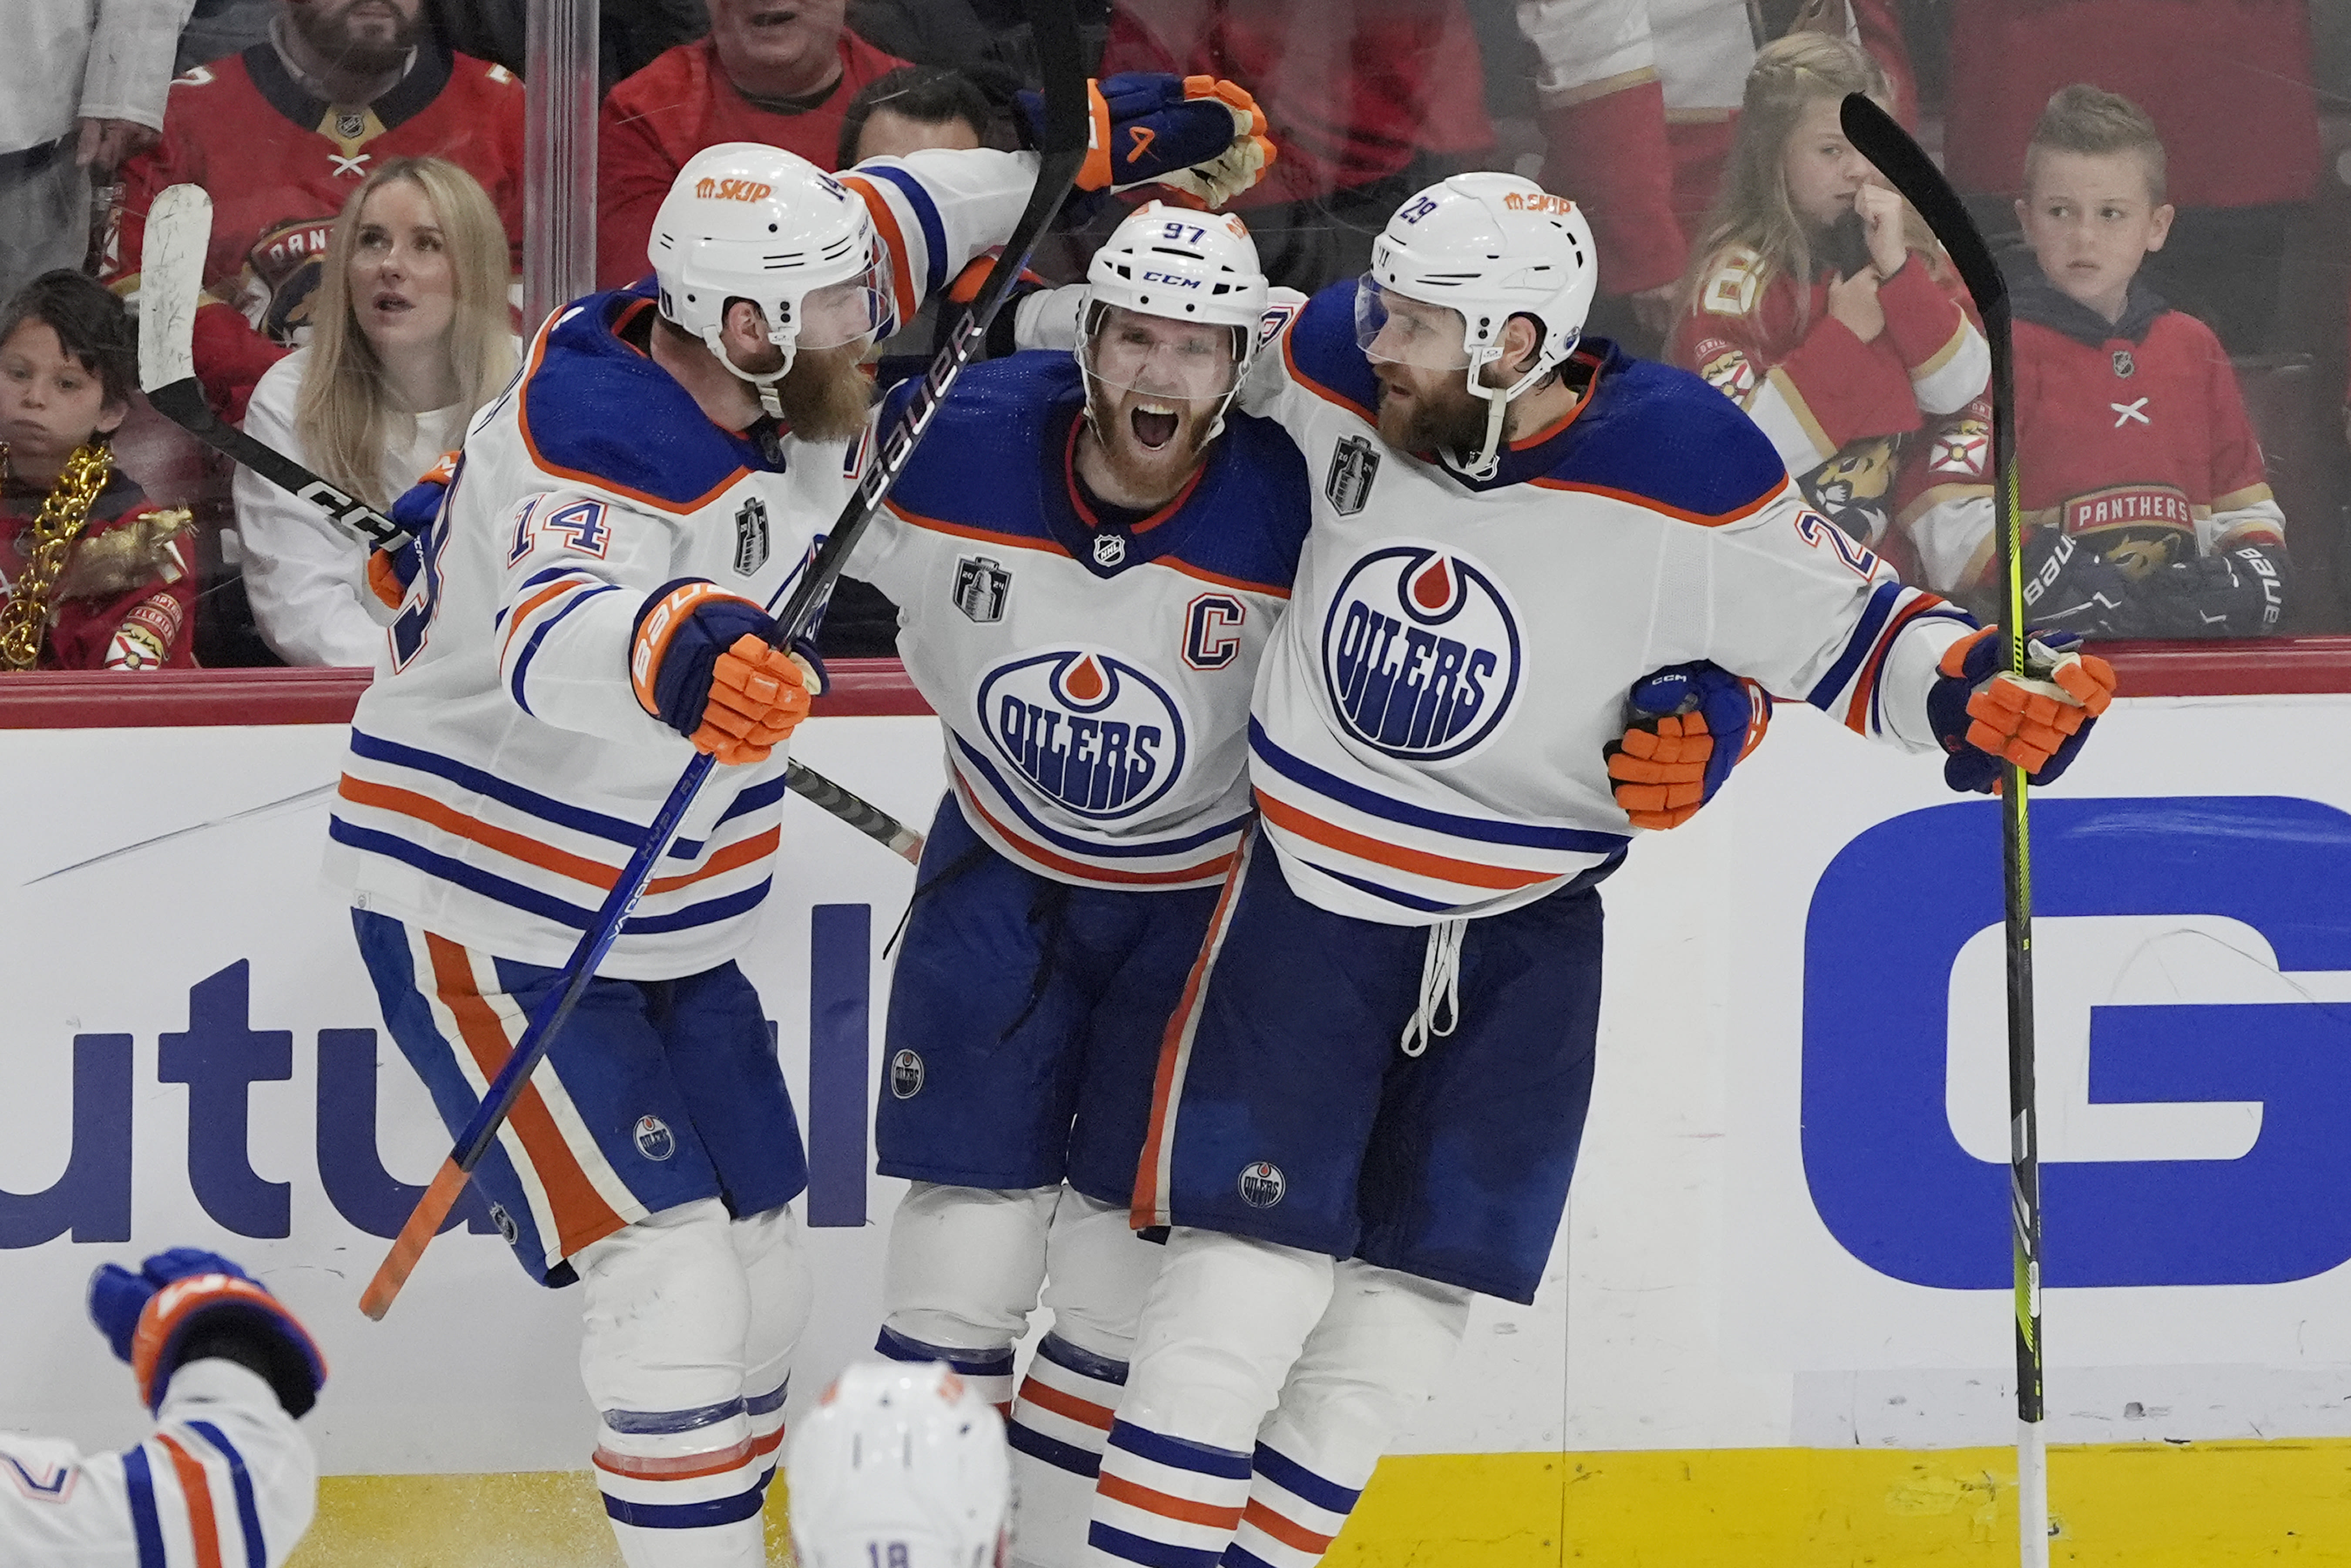 Stanley Cup Final: Connor McDavid leads Oilers in Game 5 thriller to send series back to Edmonton